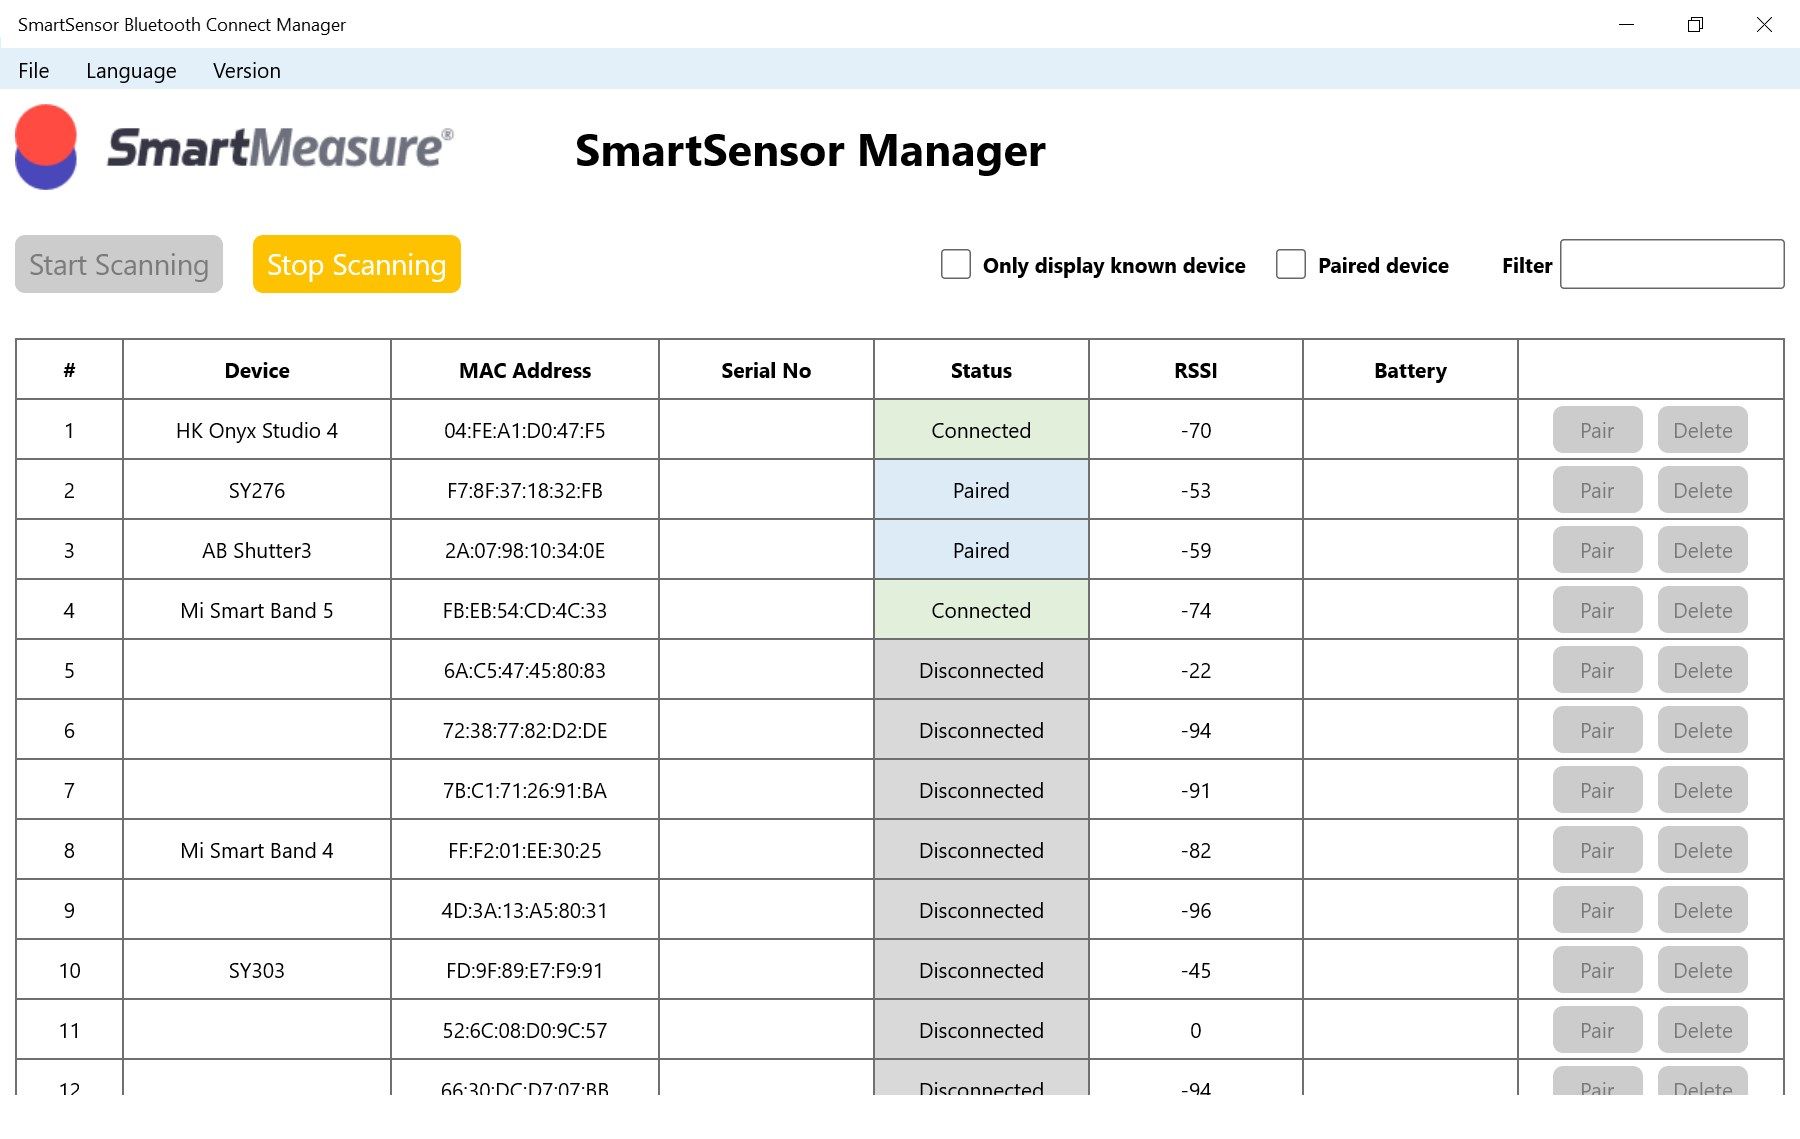 SmartSensor Bluetooth Connect Manager